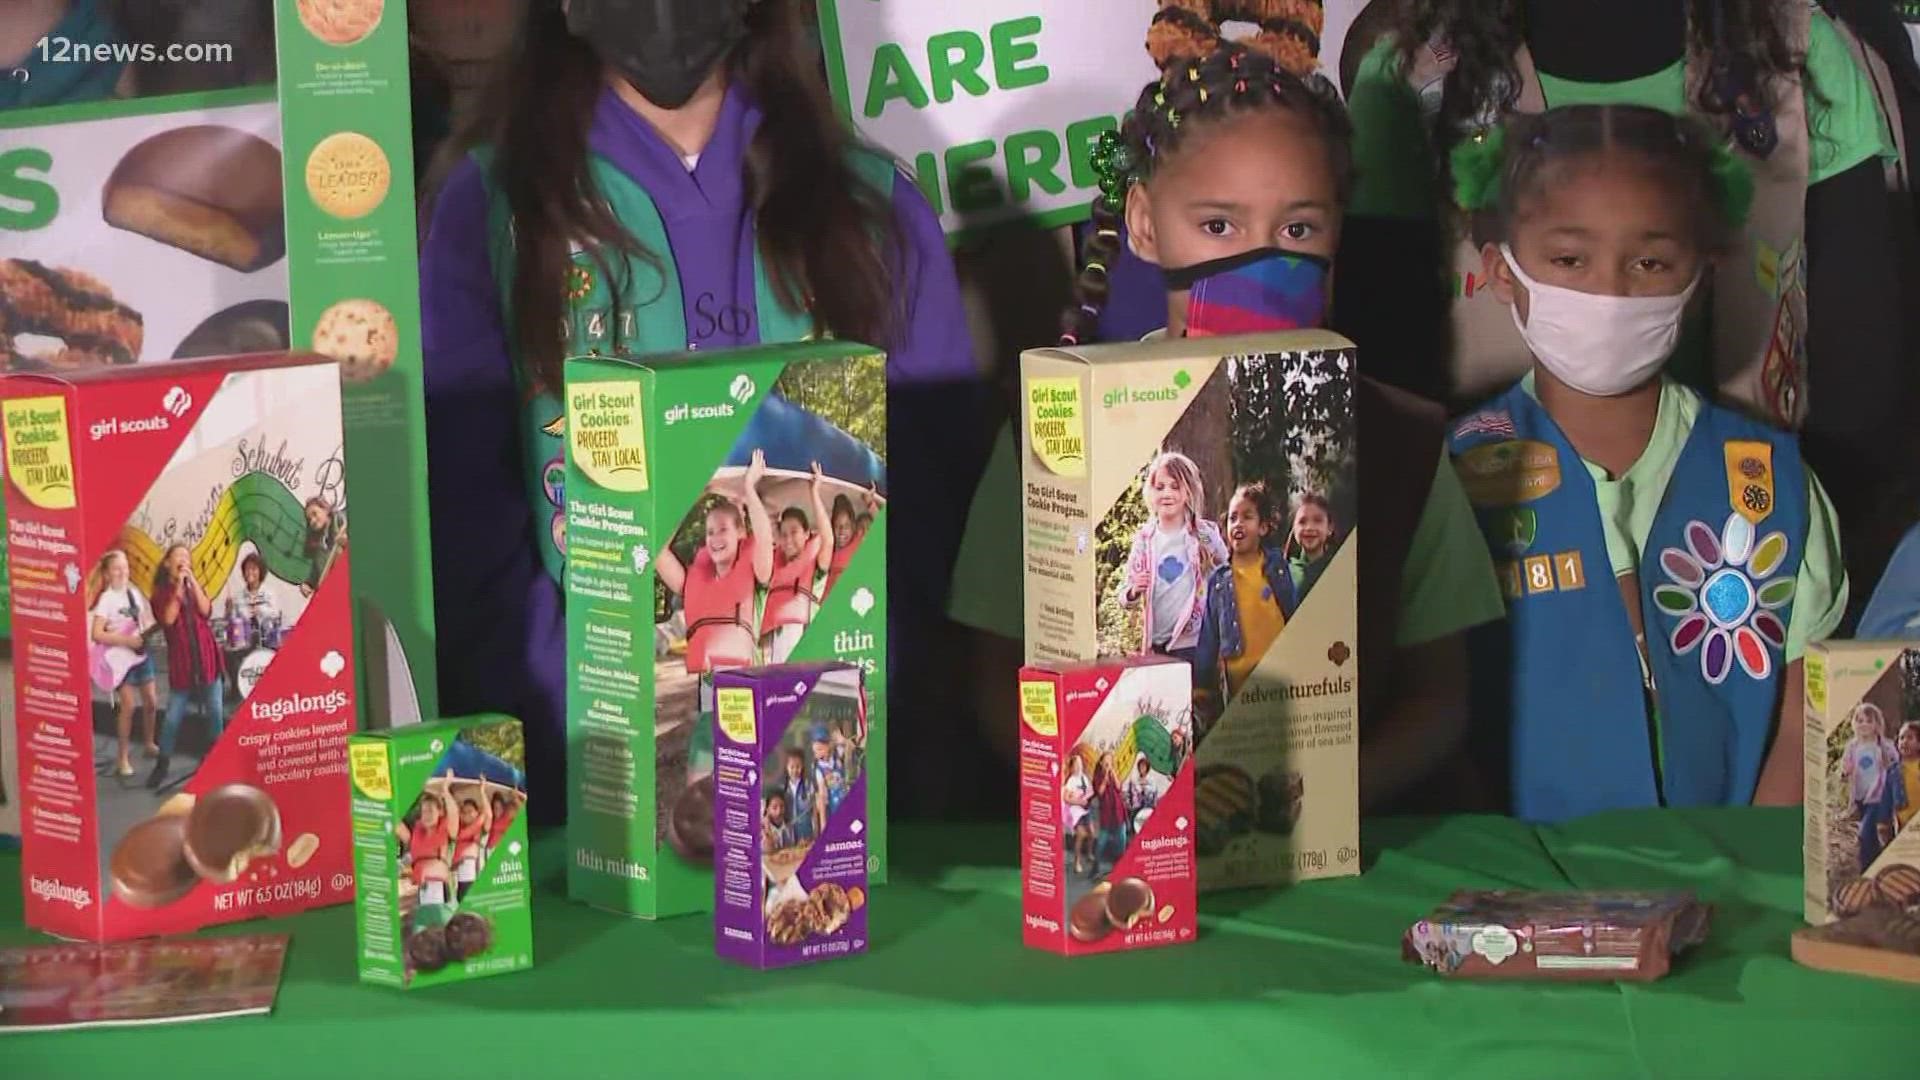 Find the closest cookies to you with the Girl Scout Cookie Finder here: https://www.girlscouts.org/en/cookies/how-to-buy-cookies.html